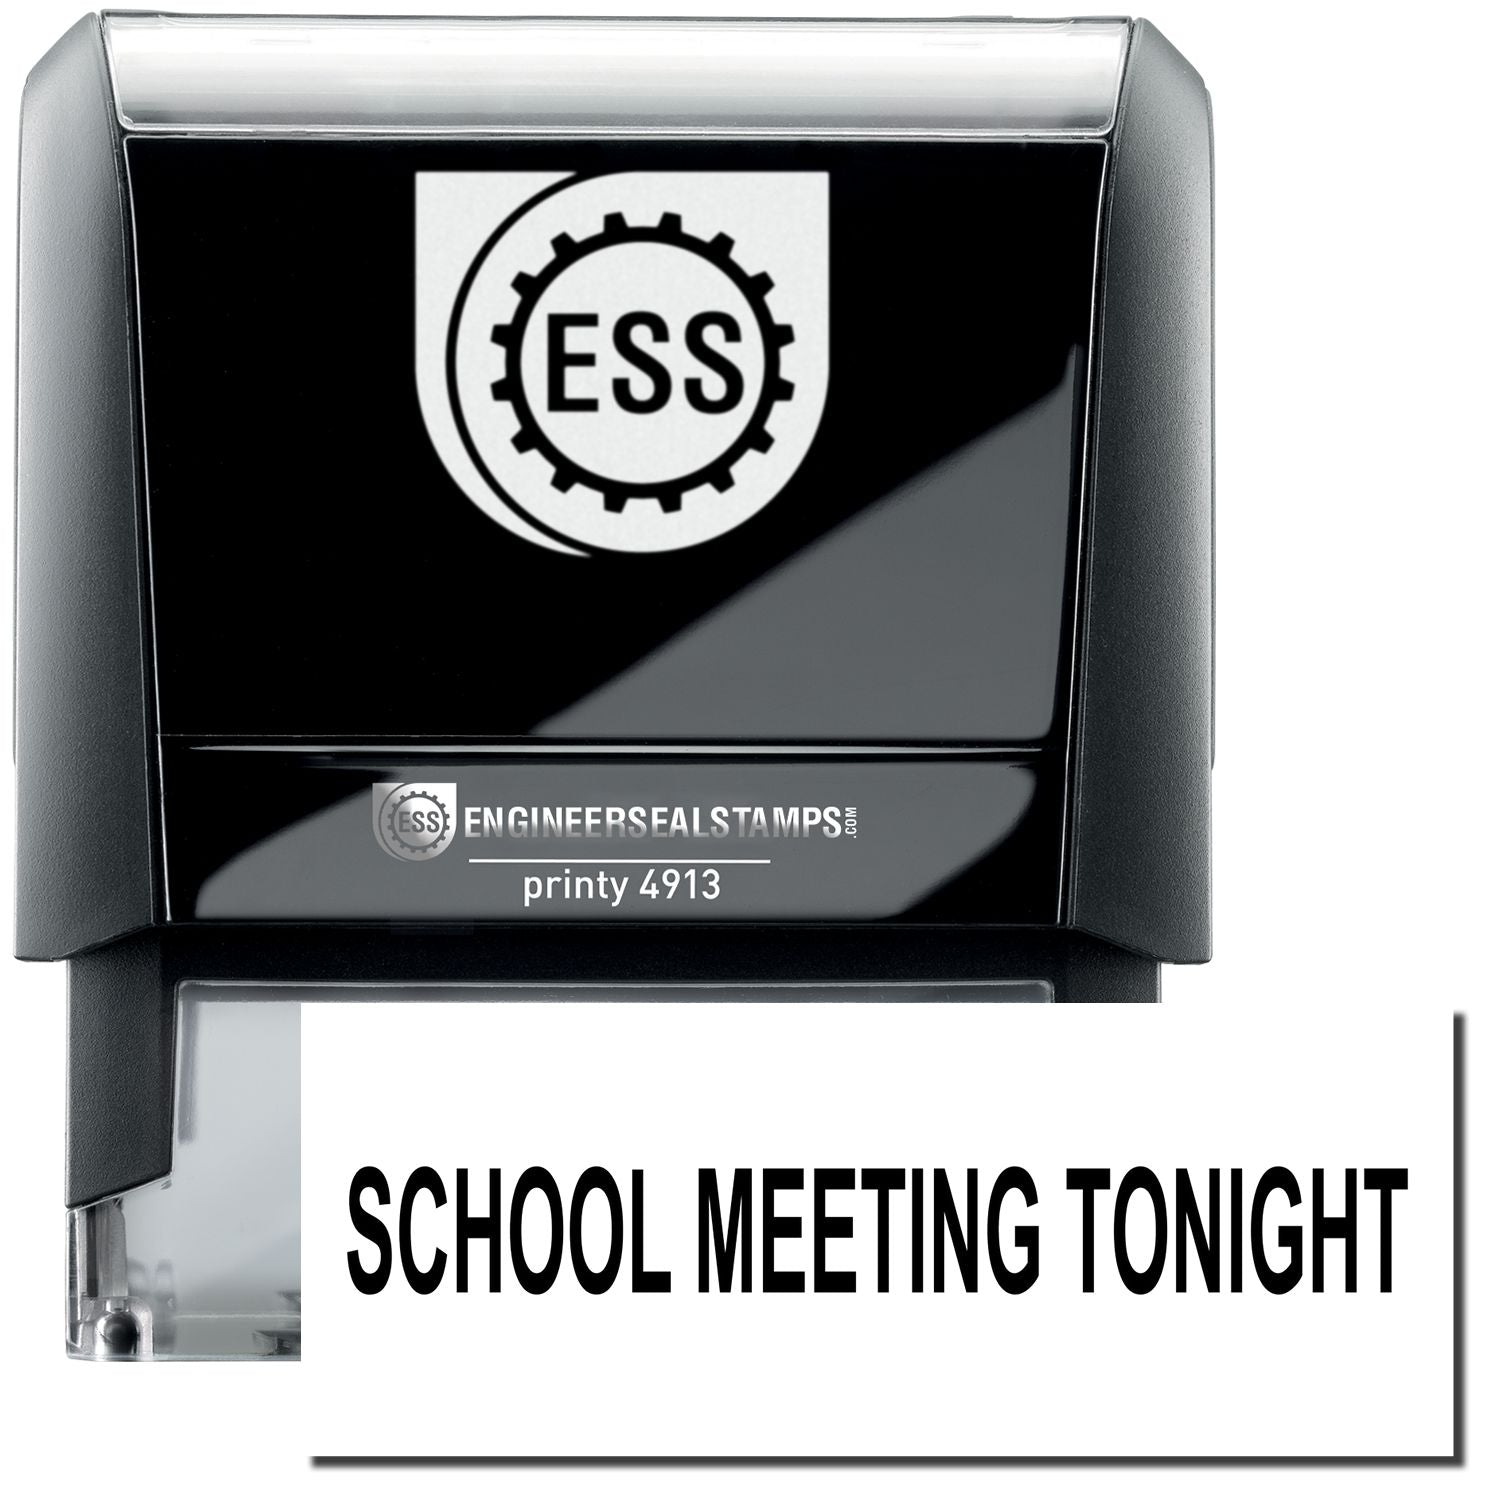 A self-inking stamp with a stamped image showing how the text "SCHOOL MEETING TONIGHT" in a large bold font is displayed by it.